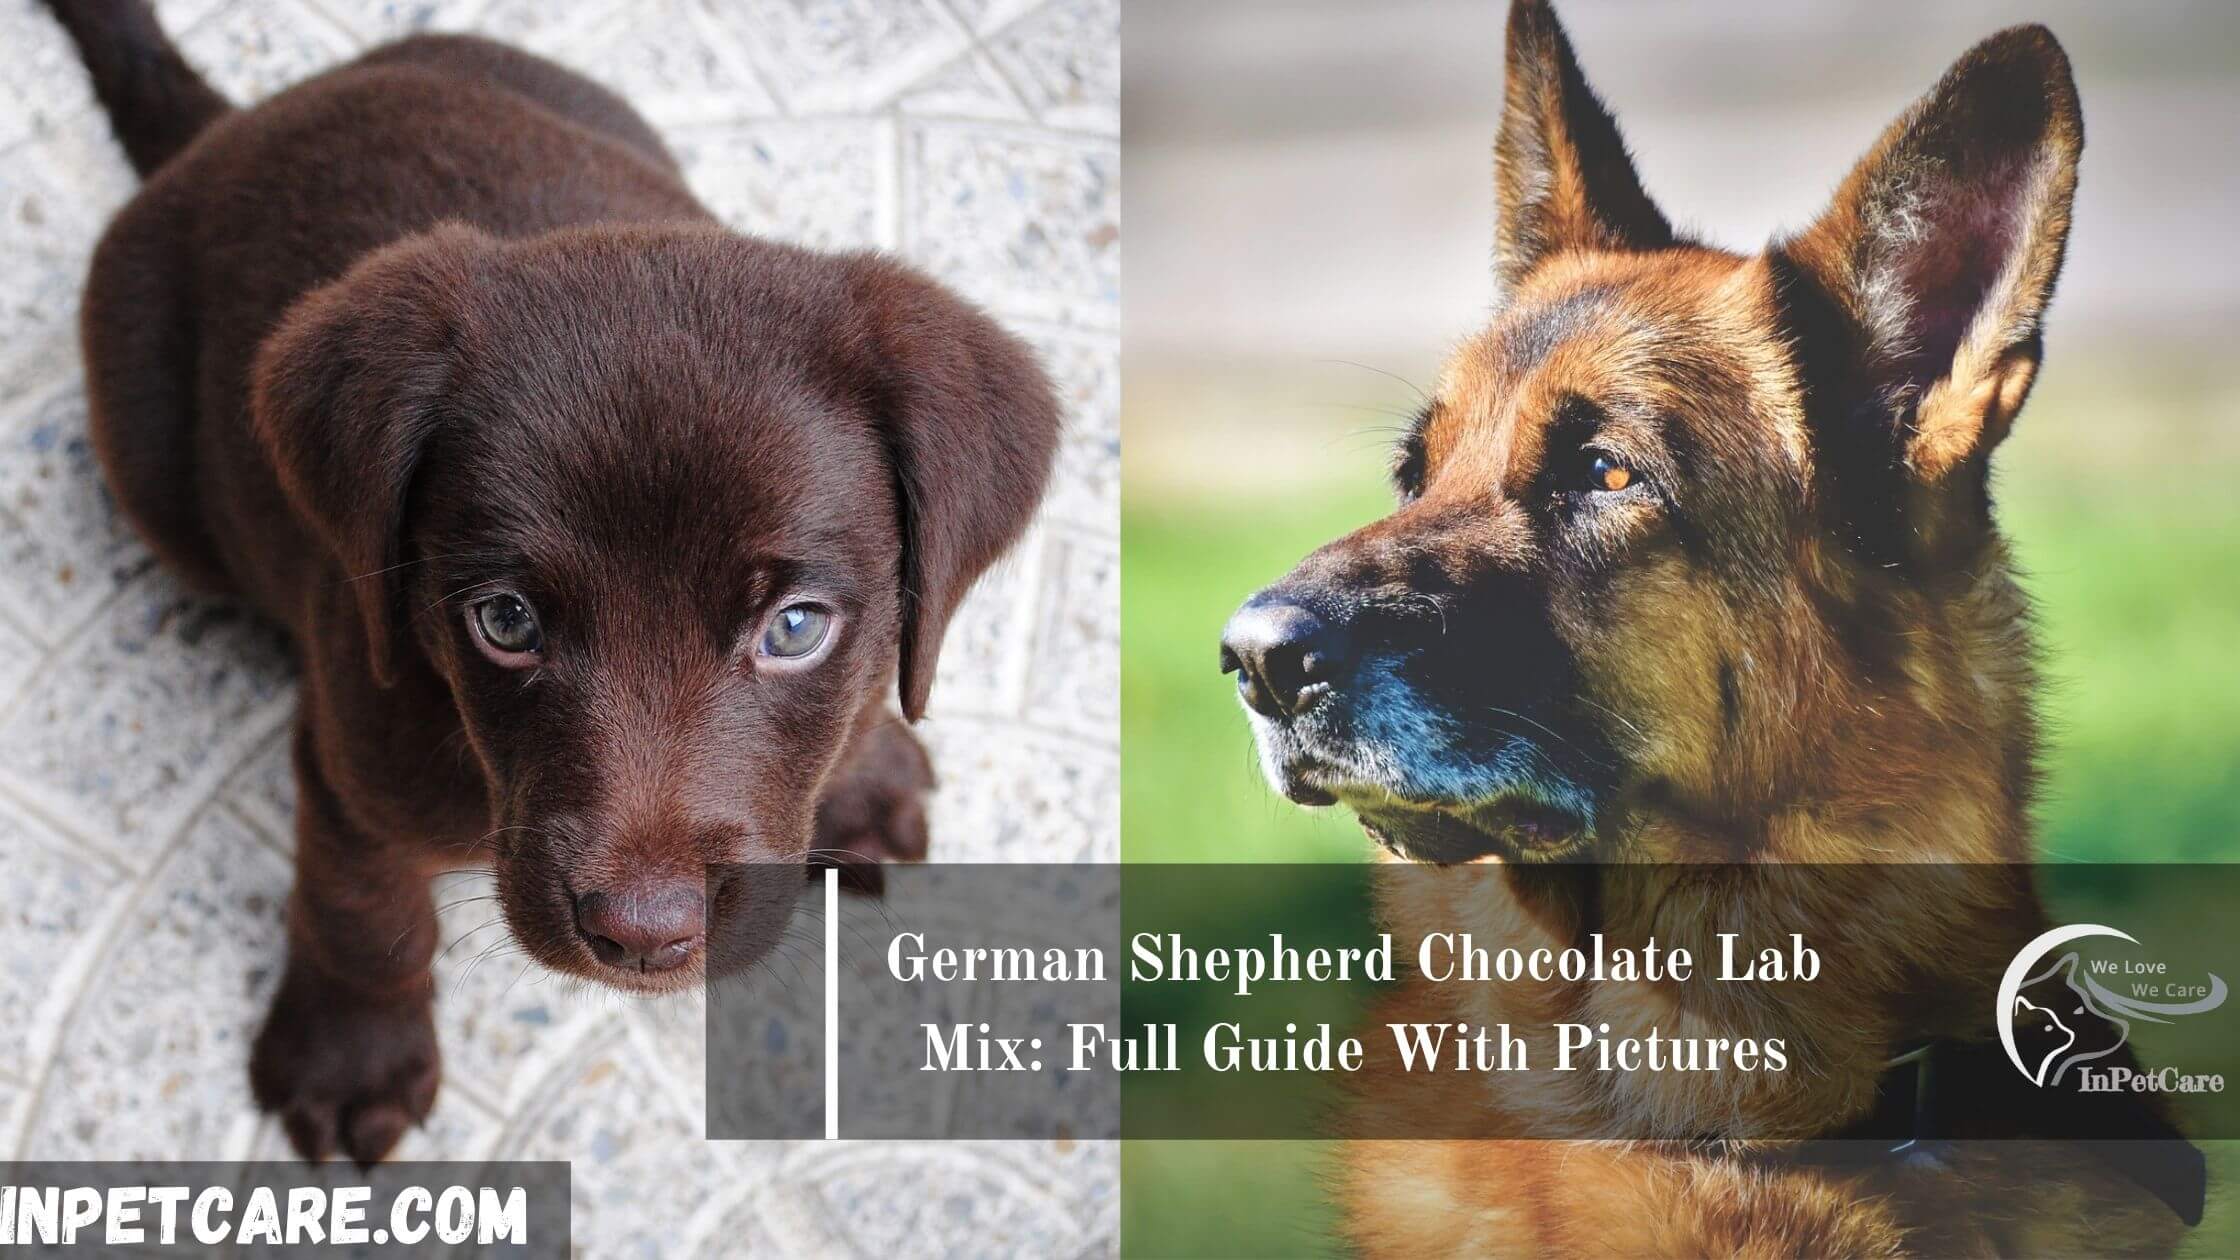 German Shepherd Chocolate Lab Mix: Full Guide With Pictures